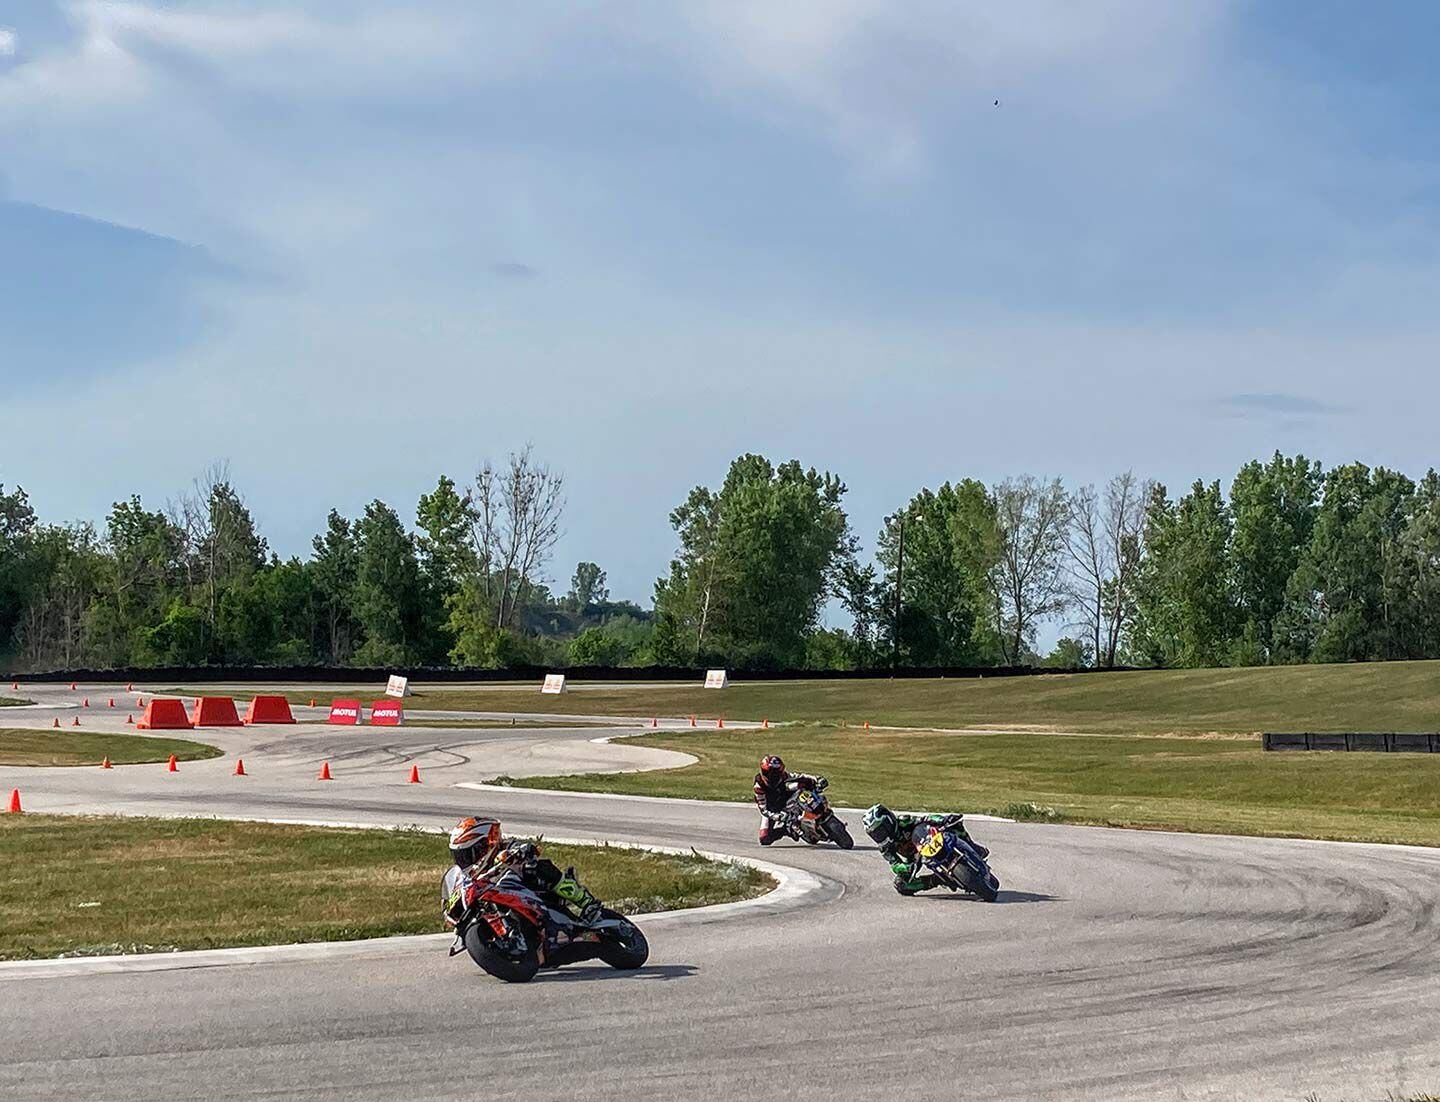 The MotoAmerica Mini Cup presented by Motul showcased 6–14 years old riders on the Briggs & Stratton Motorplex, by turns 7 and 8.